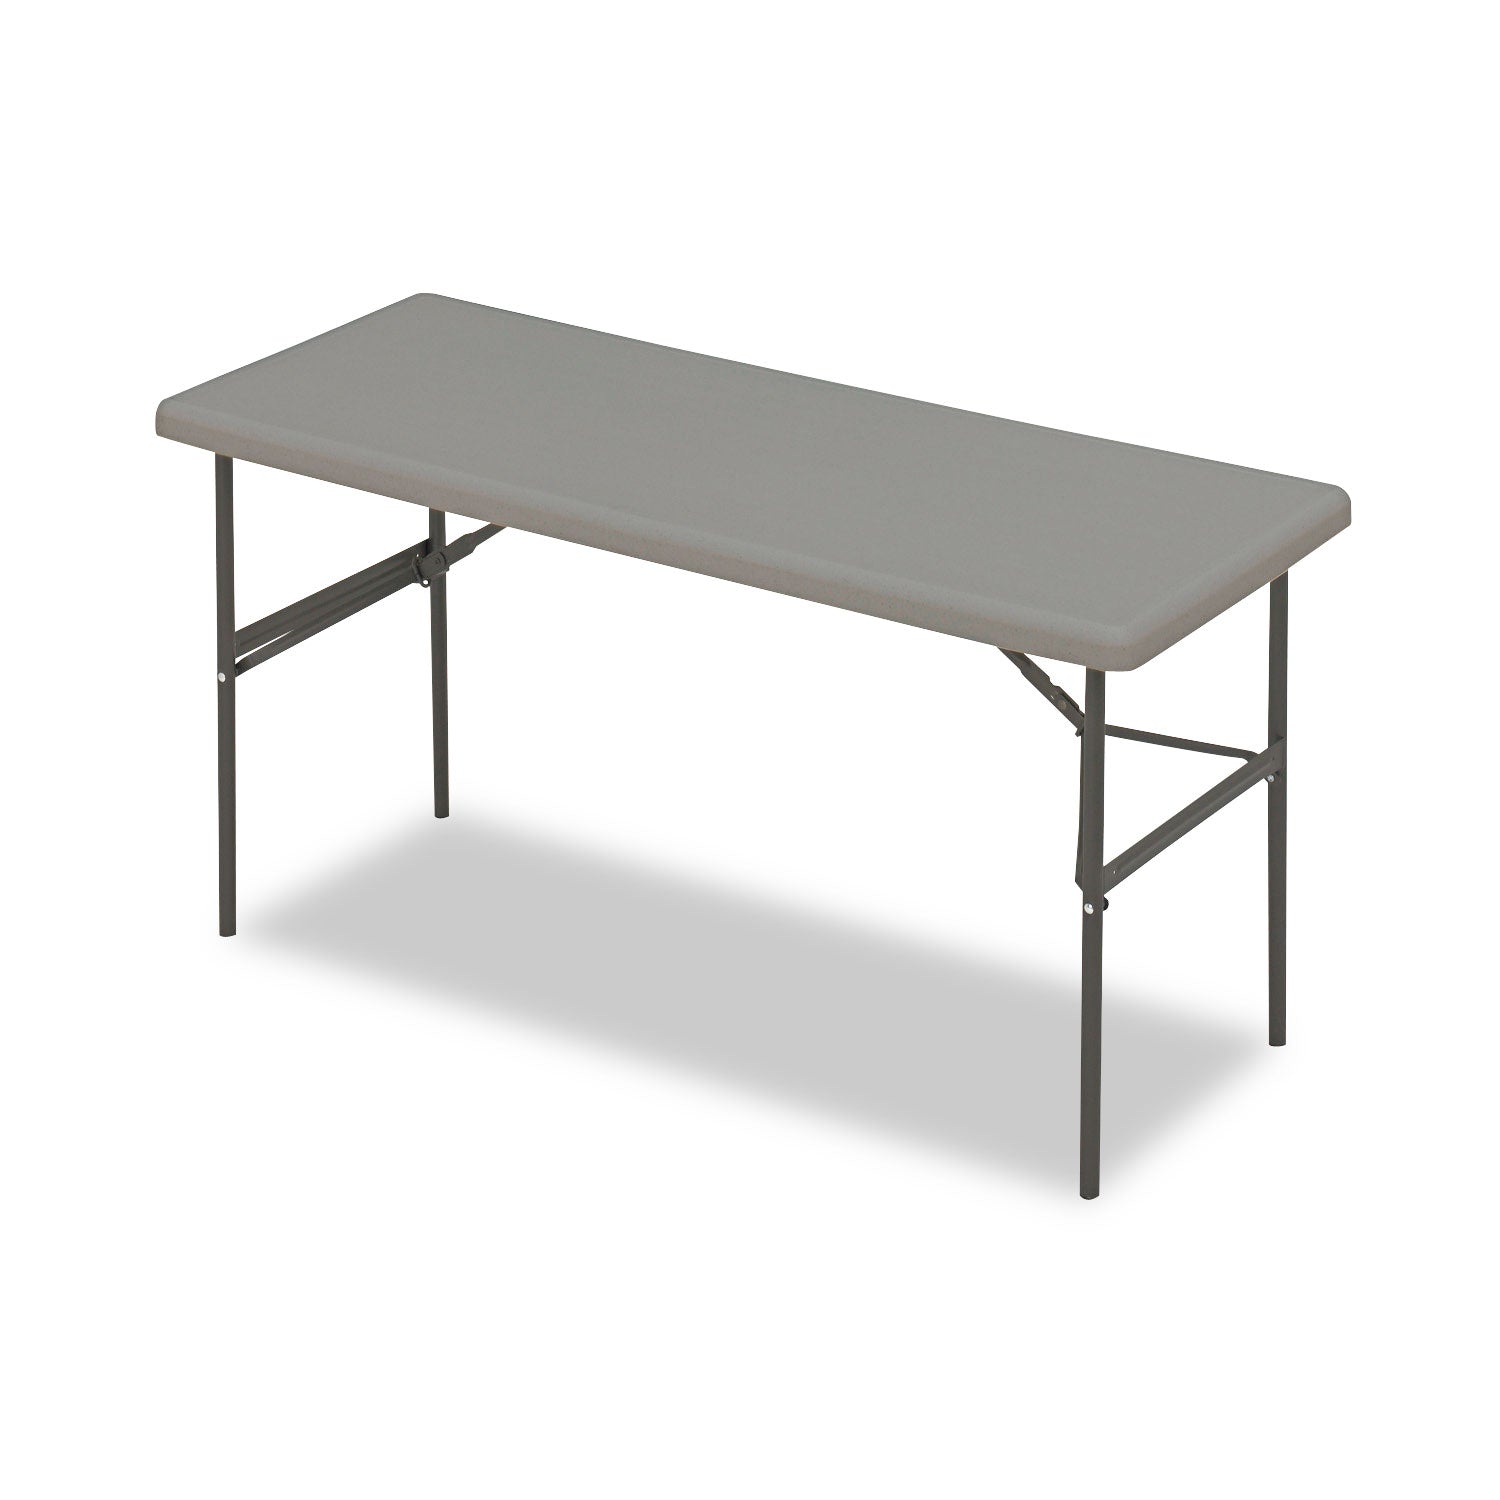 IndestrucTable Classic Folding Table, Rectangular, 60" x 24" x 29", Charcoal - 